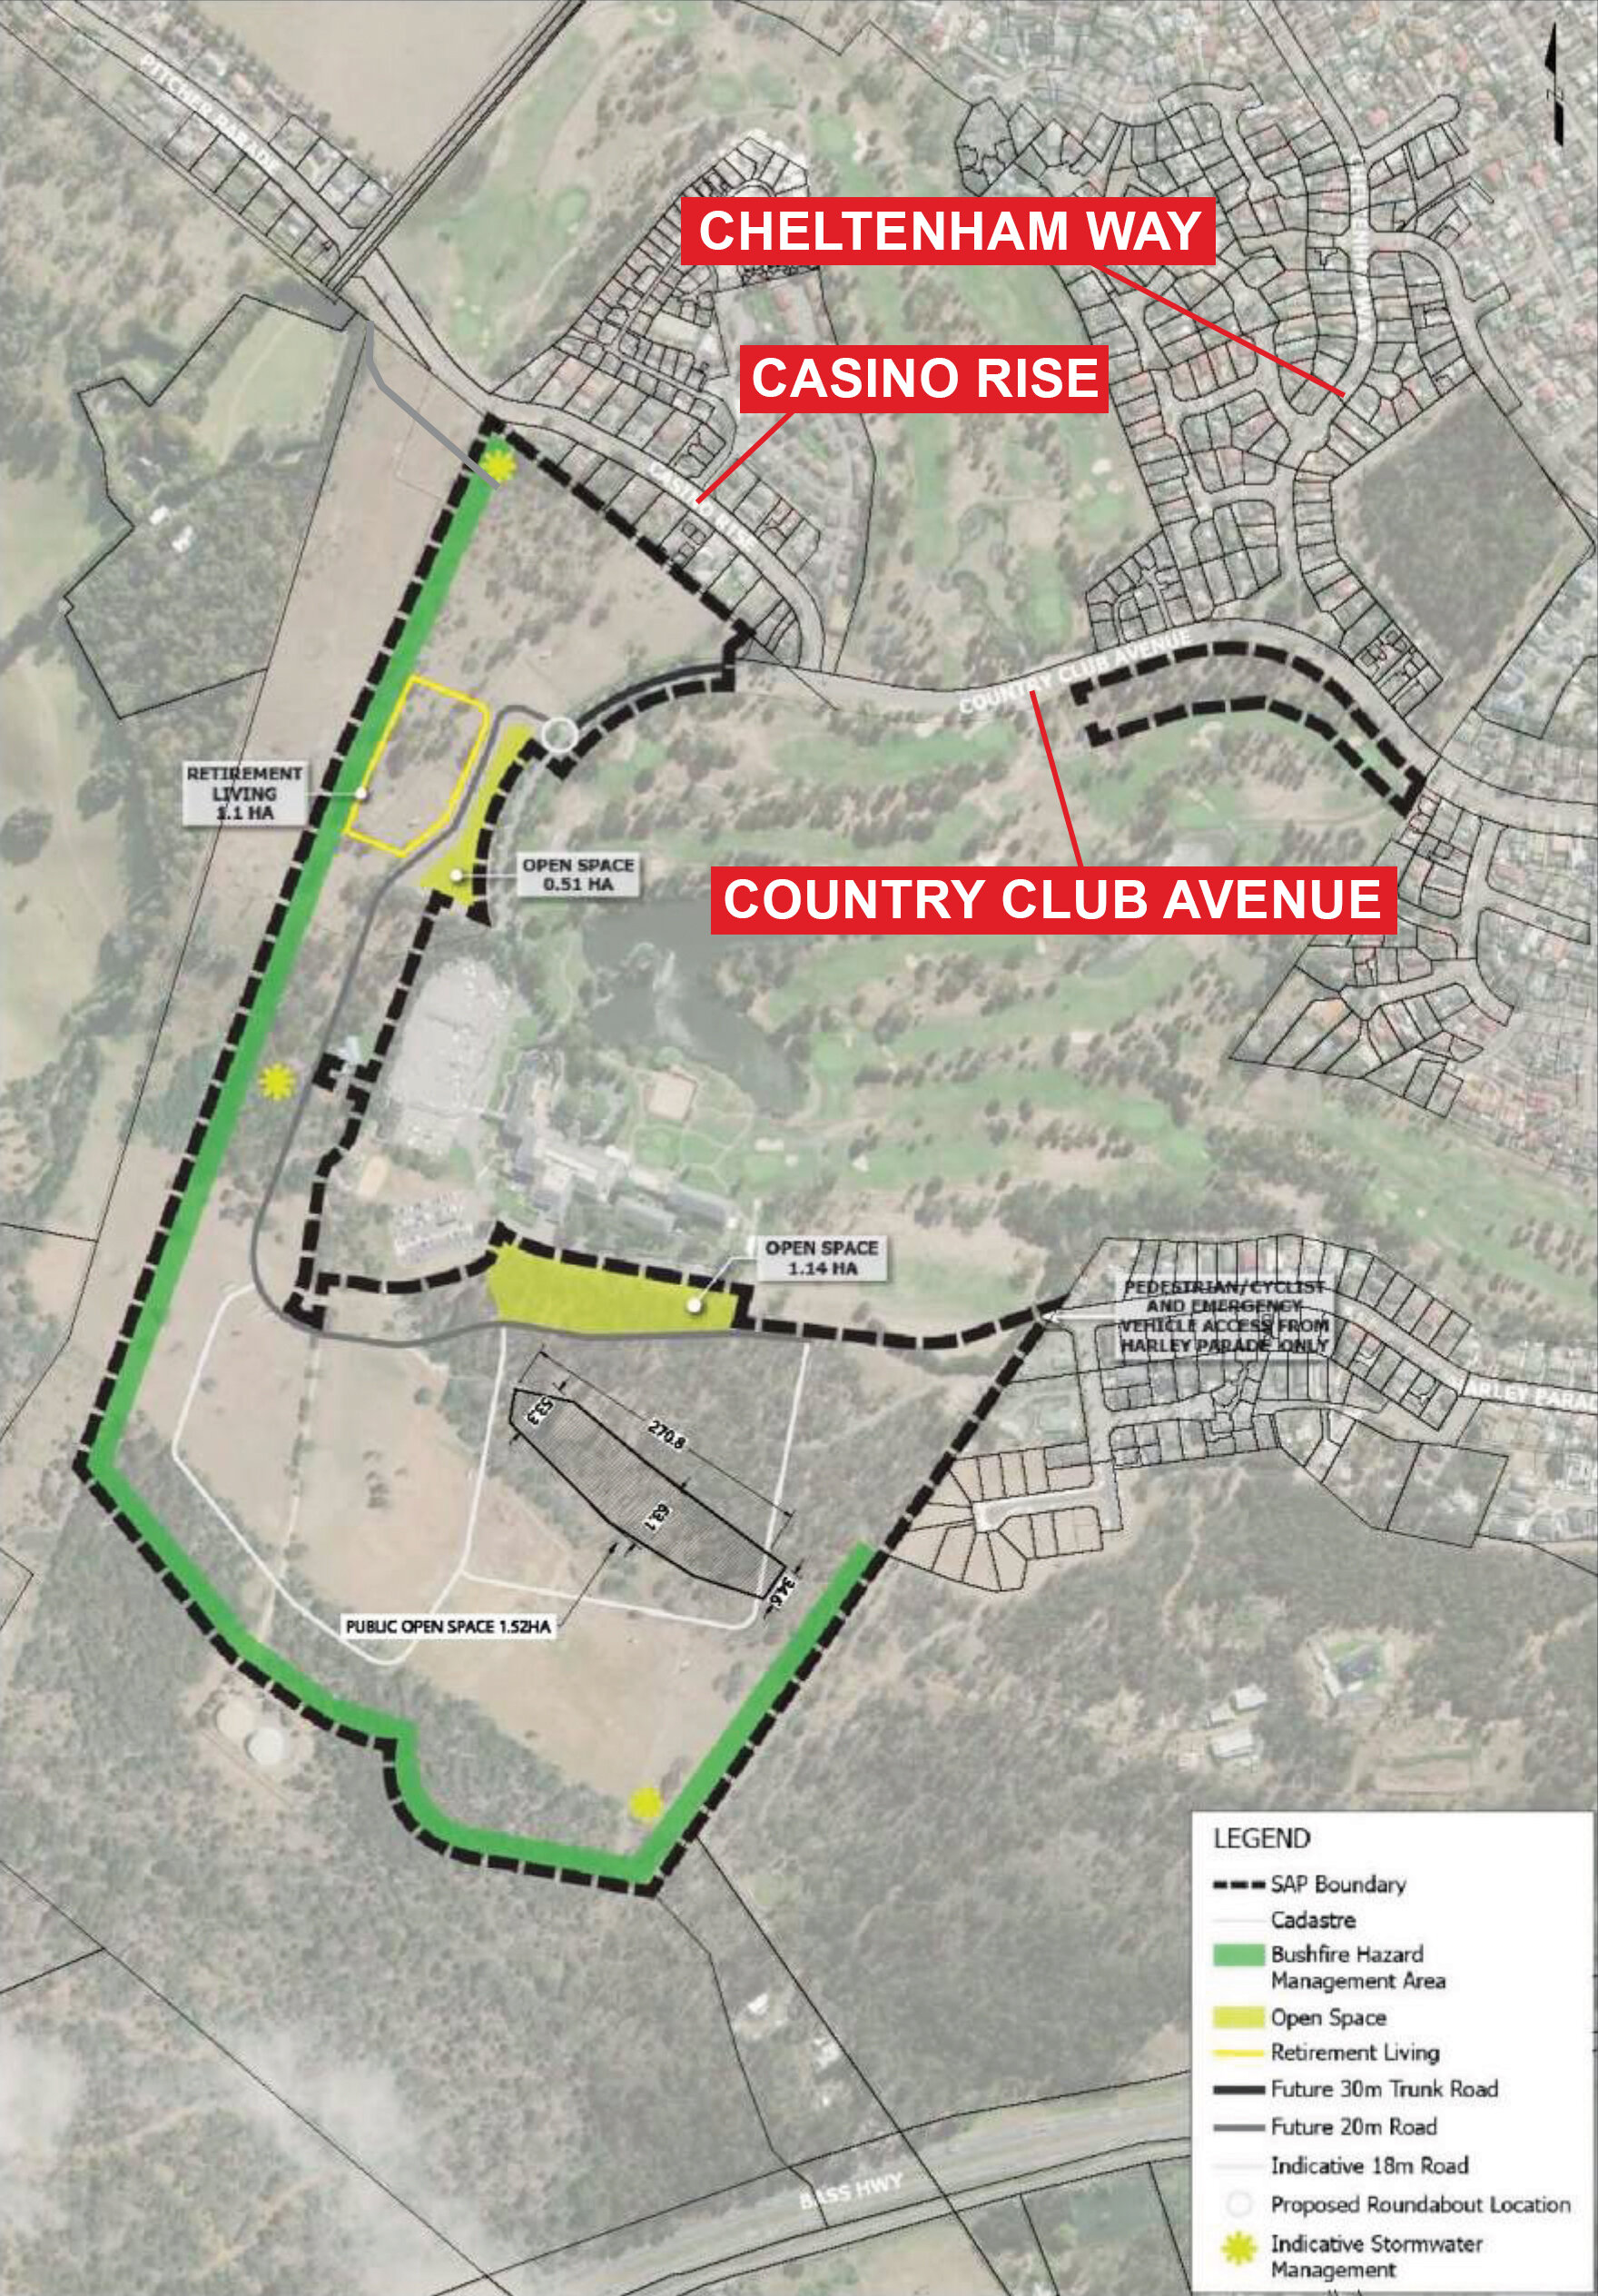 Federal Group's subdivision will impact lives, say Prospect Vale residents